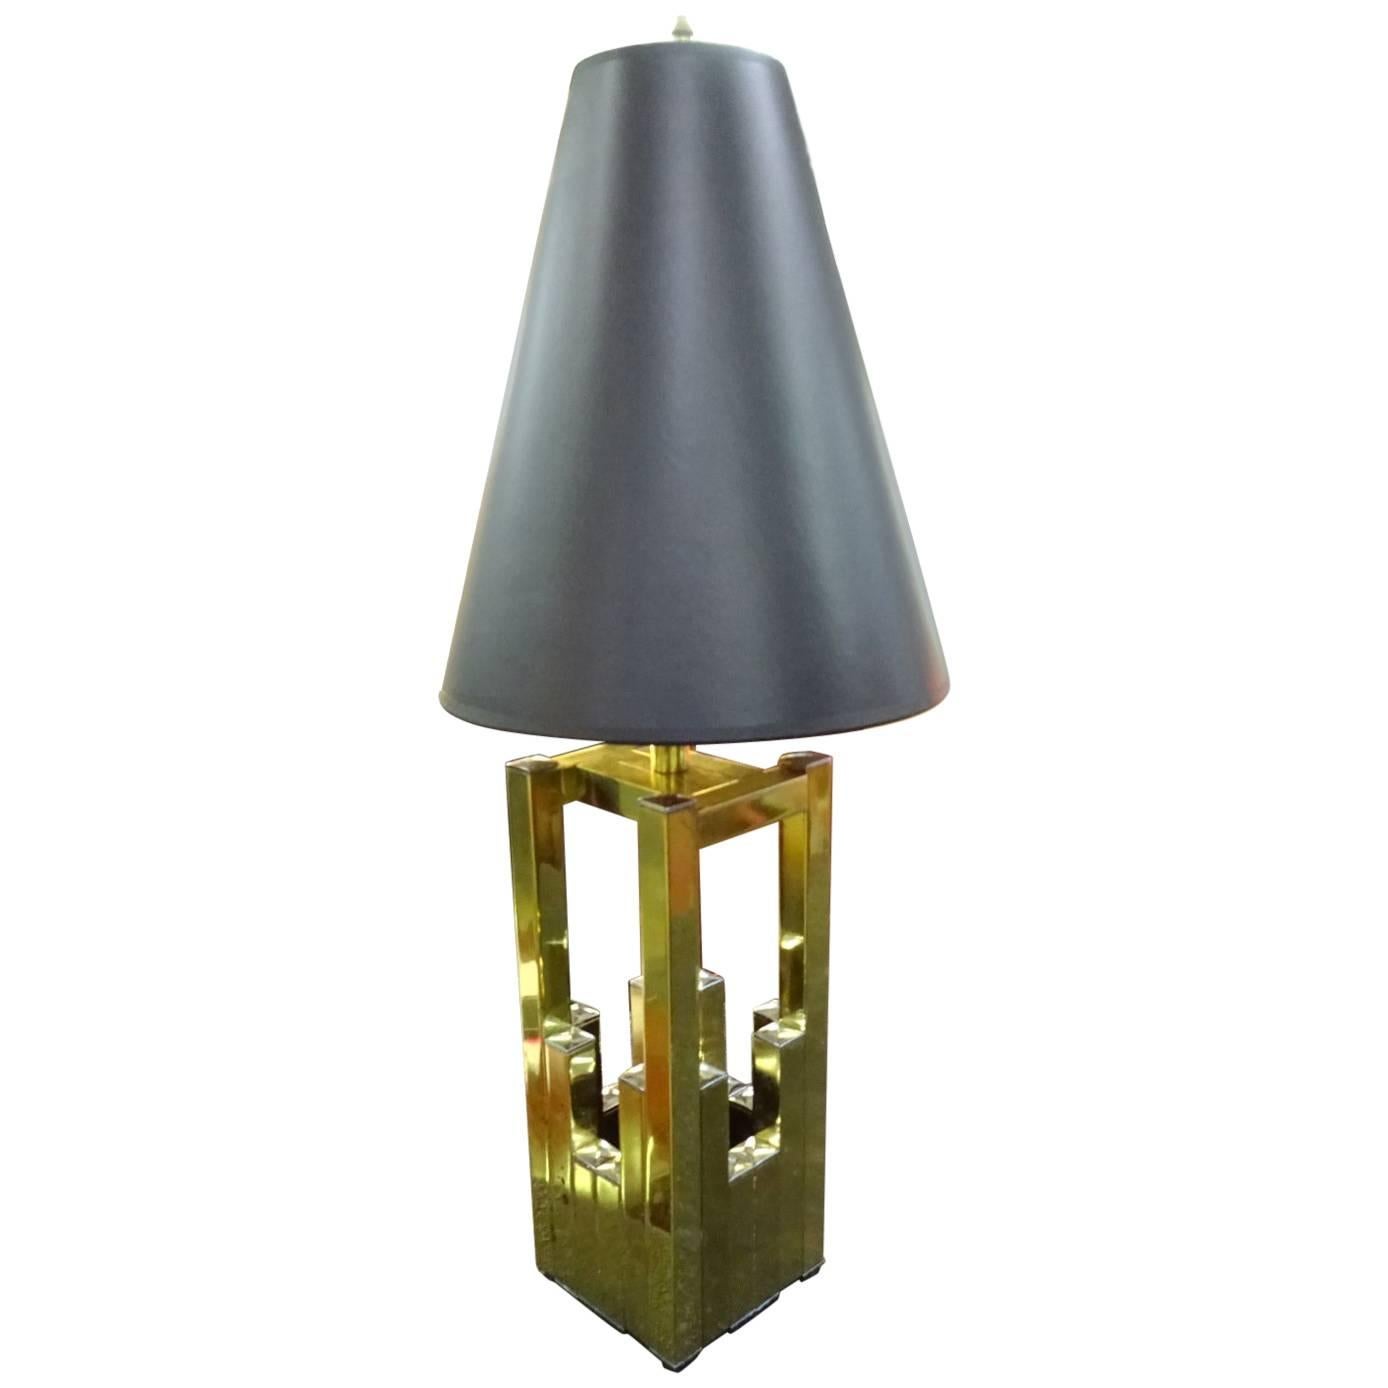 Willy Rizzo Table Lamp by Lumica